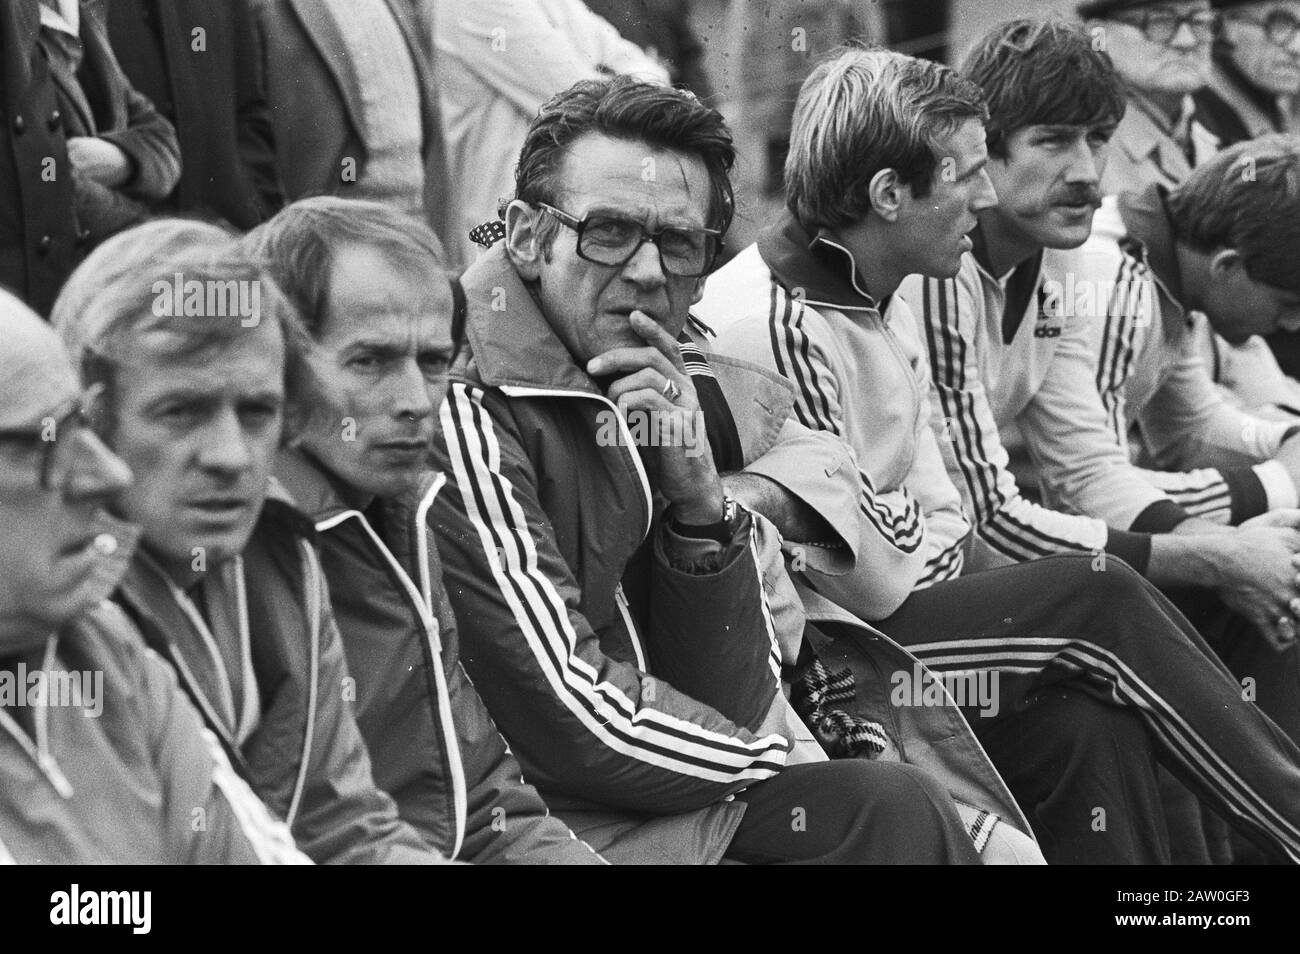 Netherlands against West Germany next Saturday, Dutch national team coach Black Cross Date: October 10, 1980 Location: Netherlands, West Germany Keywords: sport, football Stock Photo